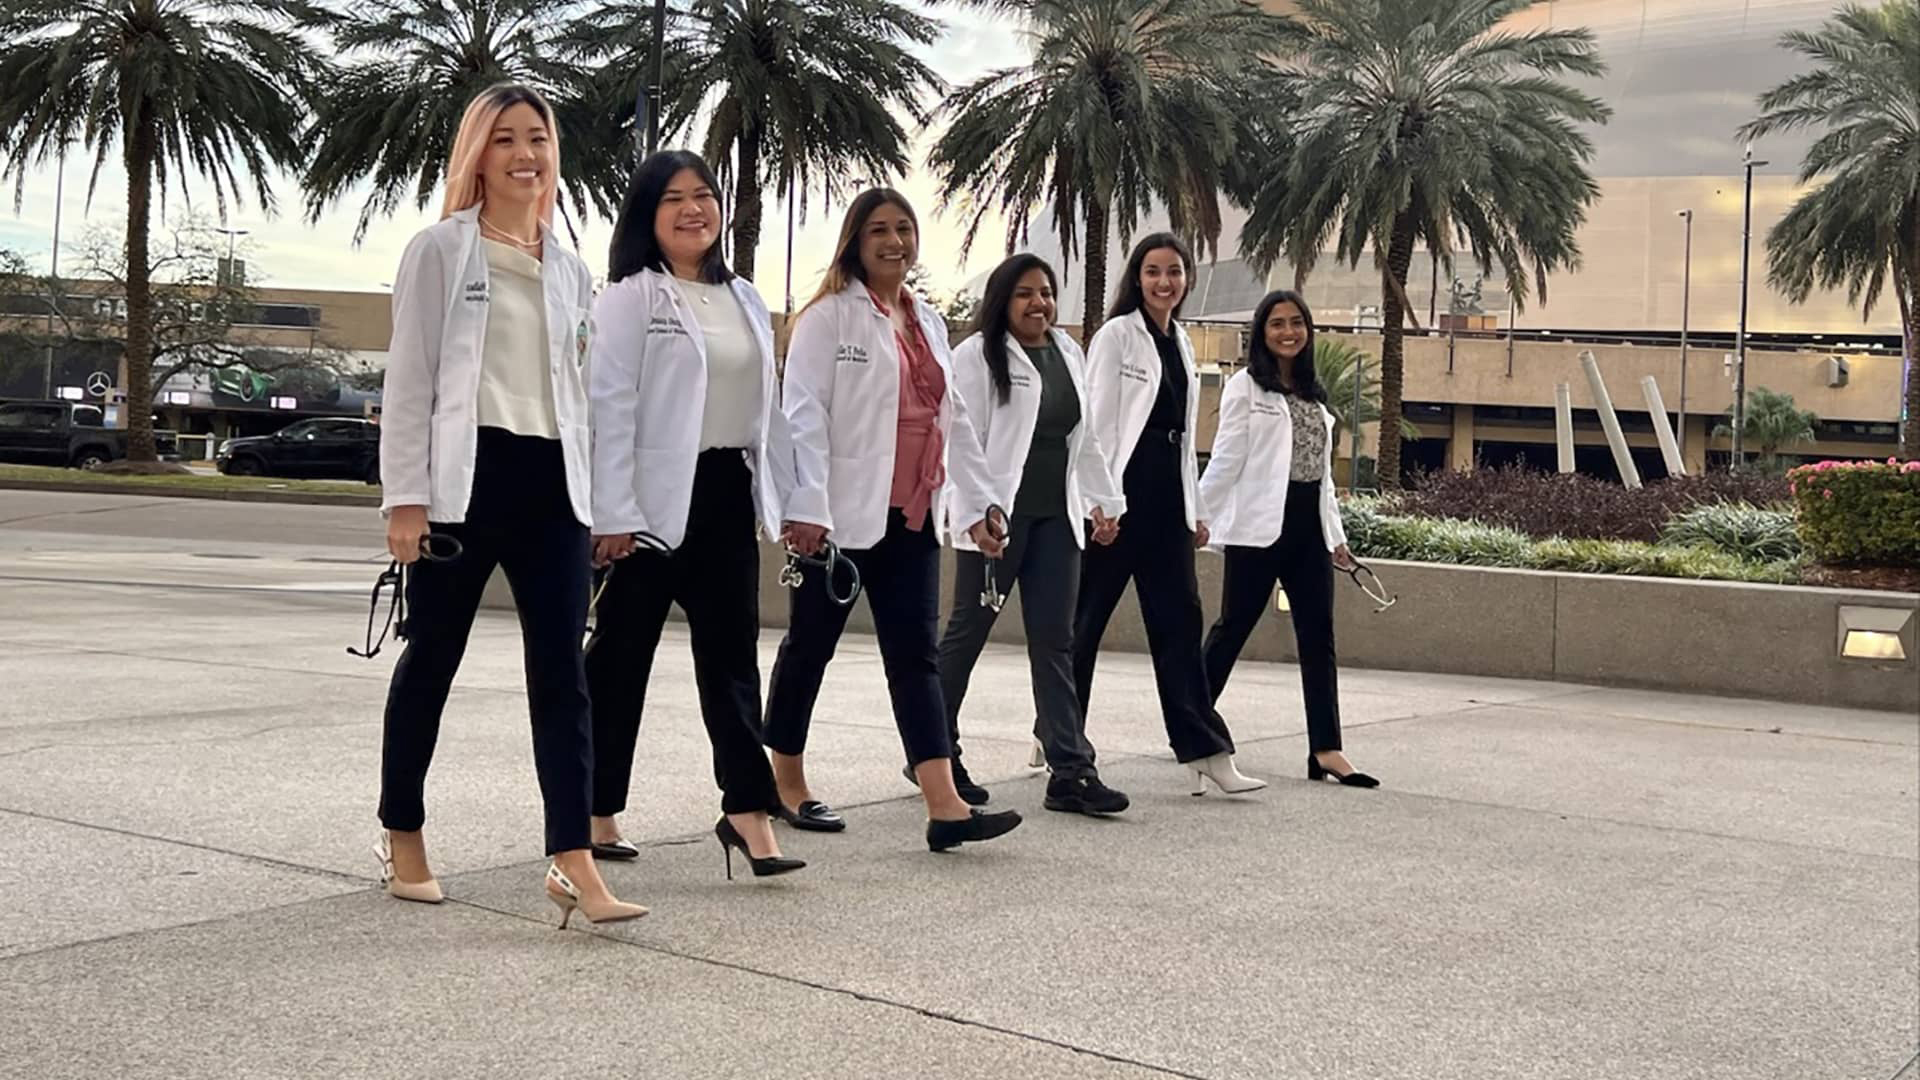 Med students walking in their white jackets